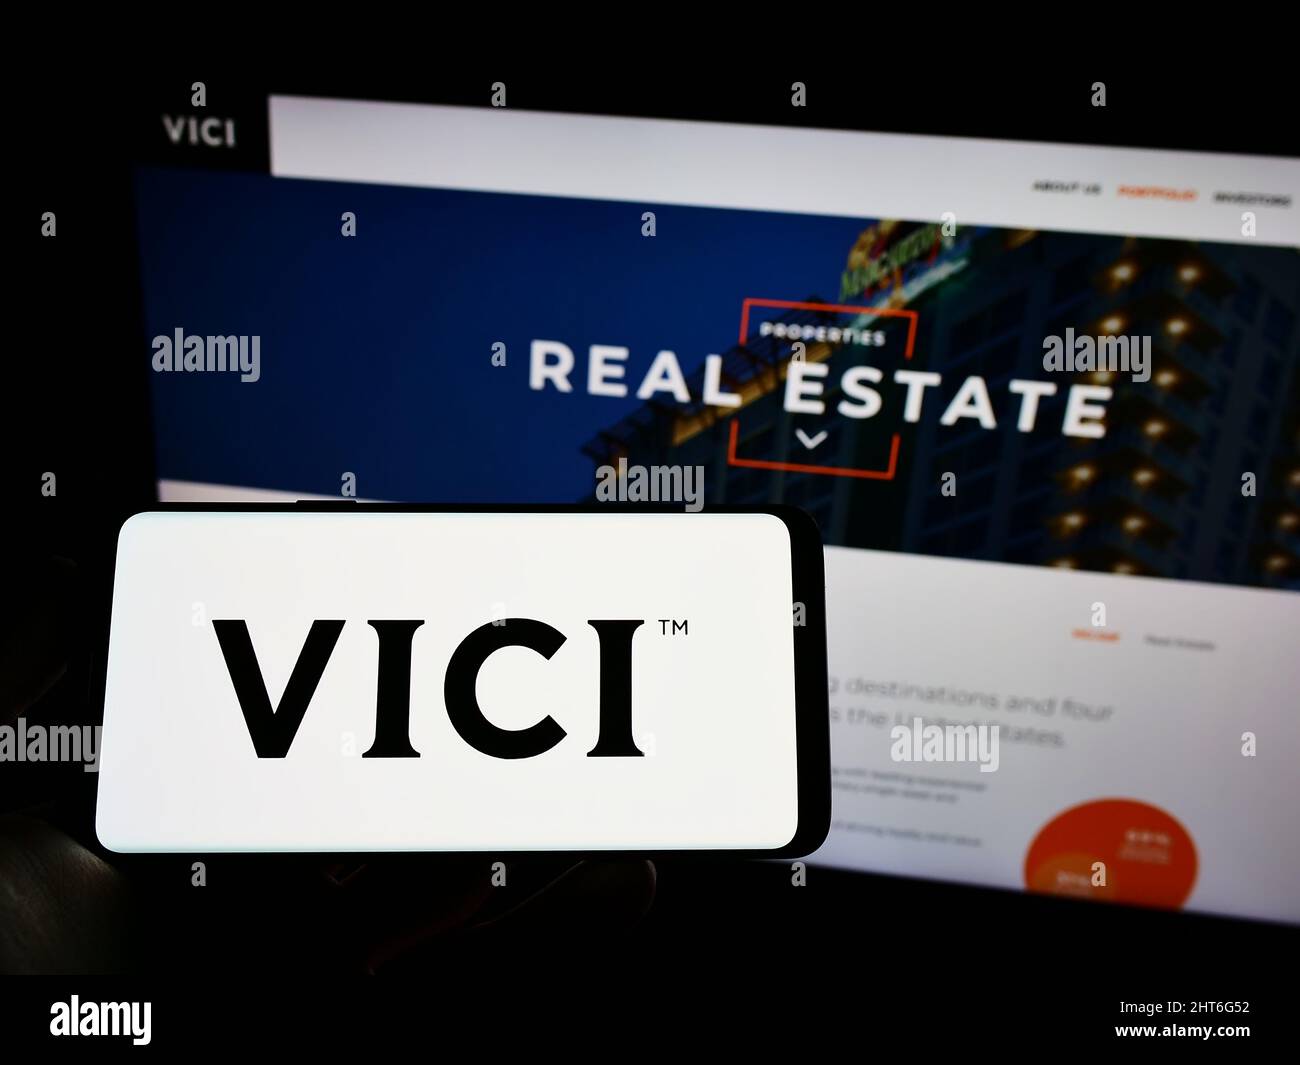 Person holding mobile phone with logo of American real estate company Vici Properties Inc. on screen in front of web page. Focus on phone display. Stock Photo